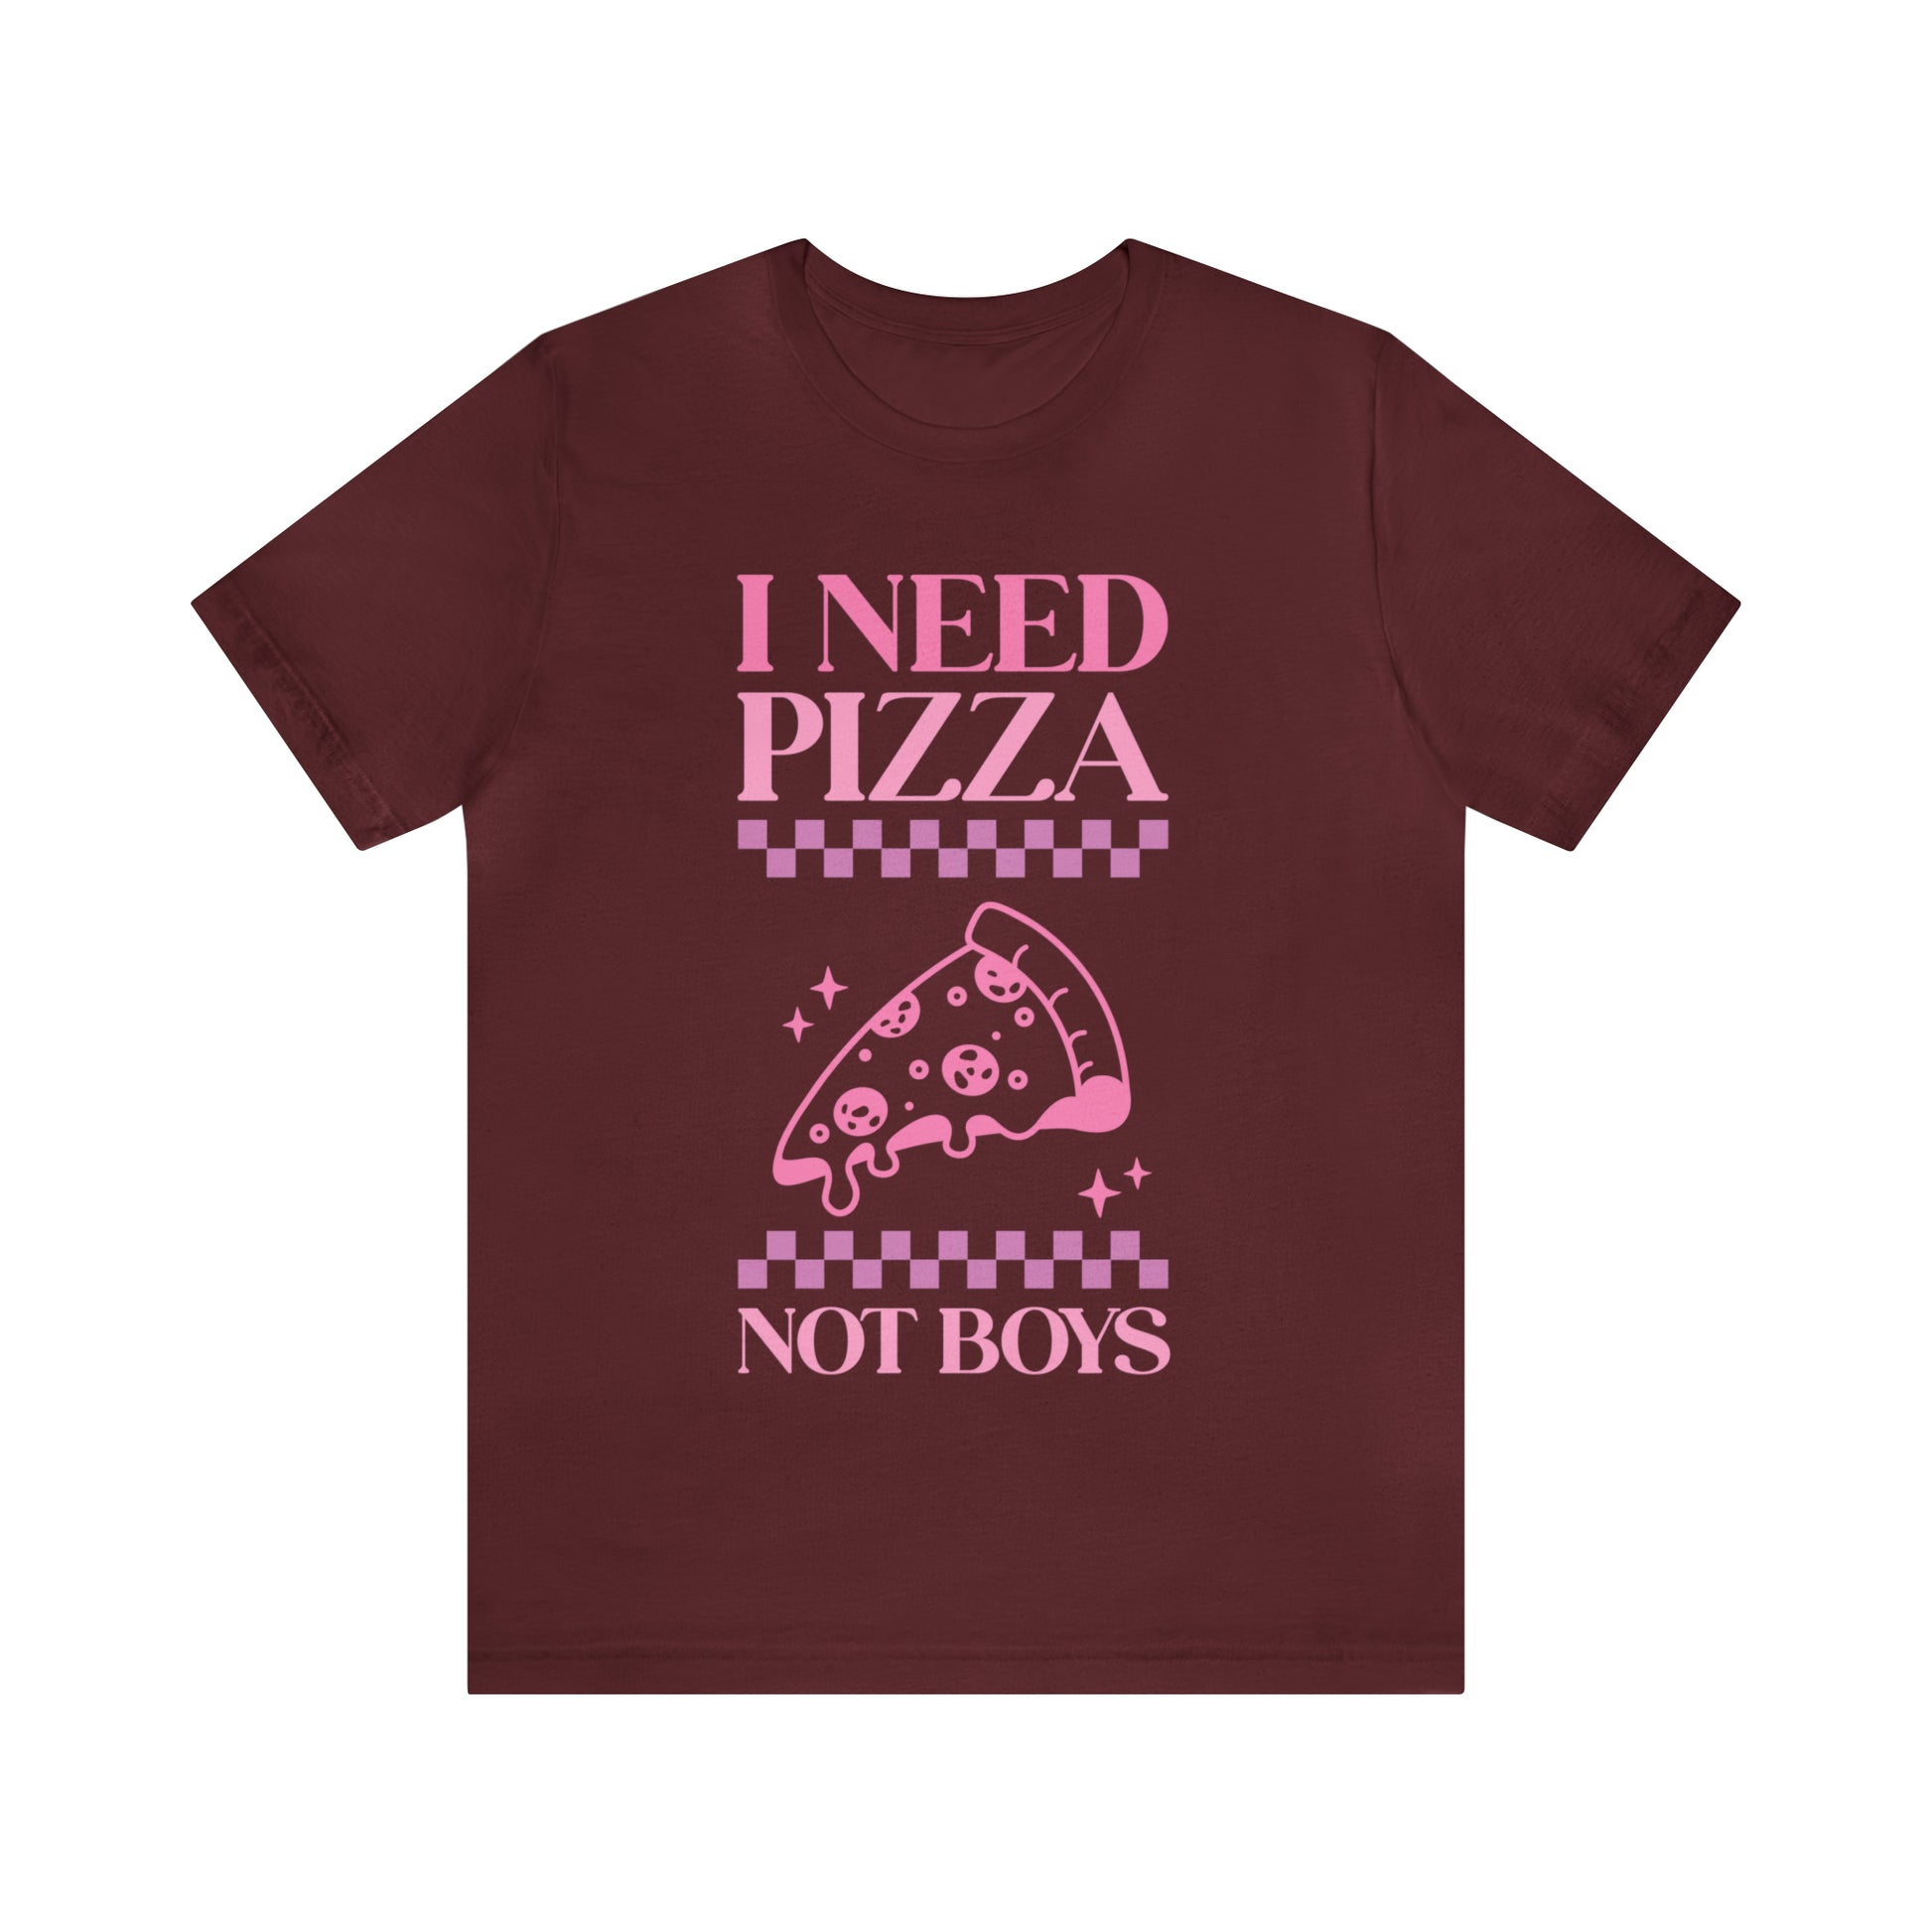 I Need Pizza Not Boys Funny Sarcastic Shirt for Girls